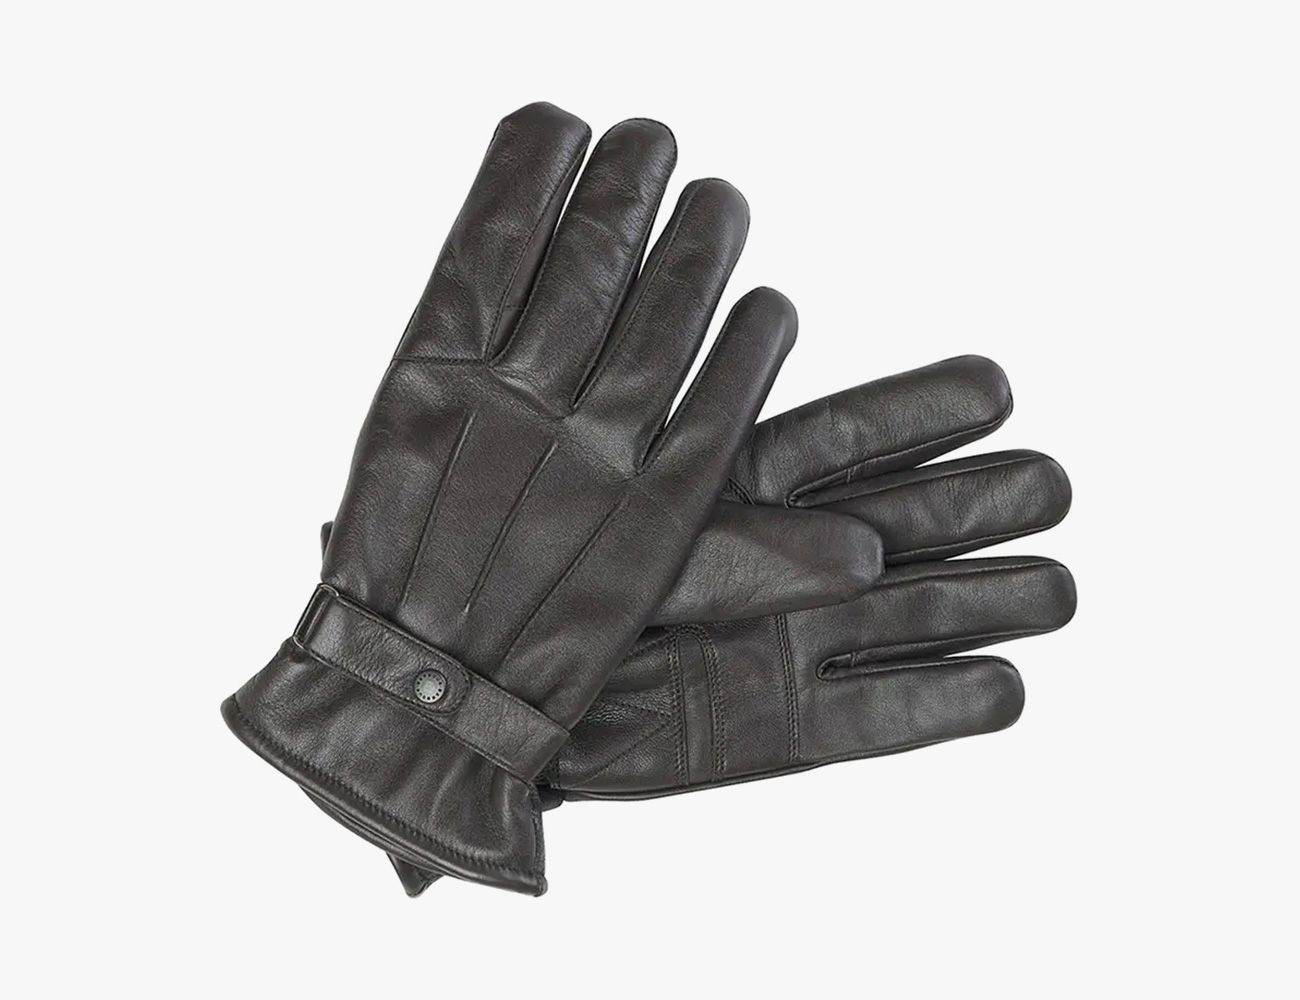 Classic Full-Finger Motorcycle Unlined Gloves,Vintage Genuine Leather Fashion Driving Gloves for Cycling,Travel,Riding Womens Leather Gloves 